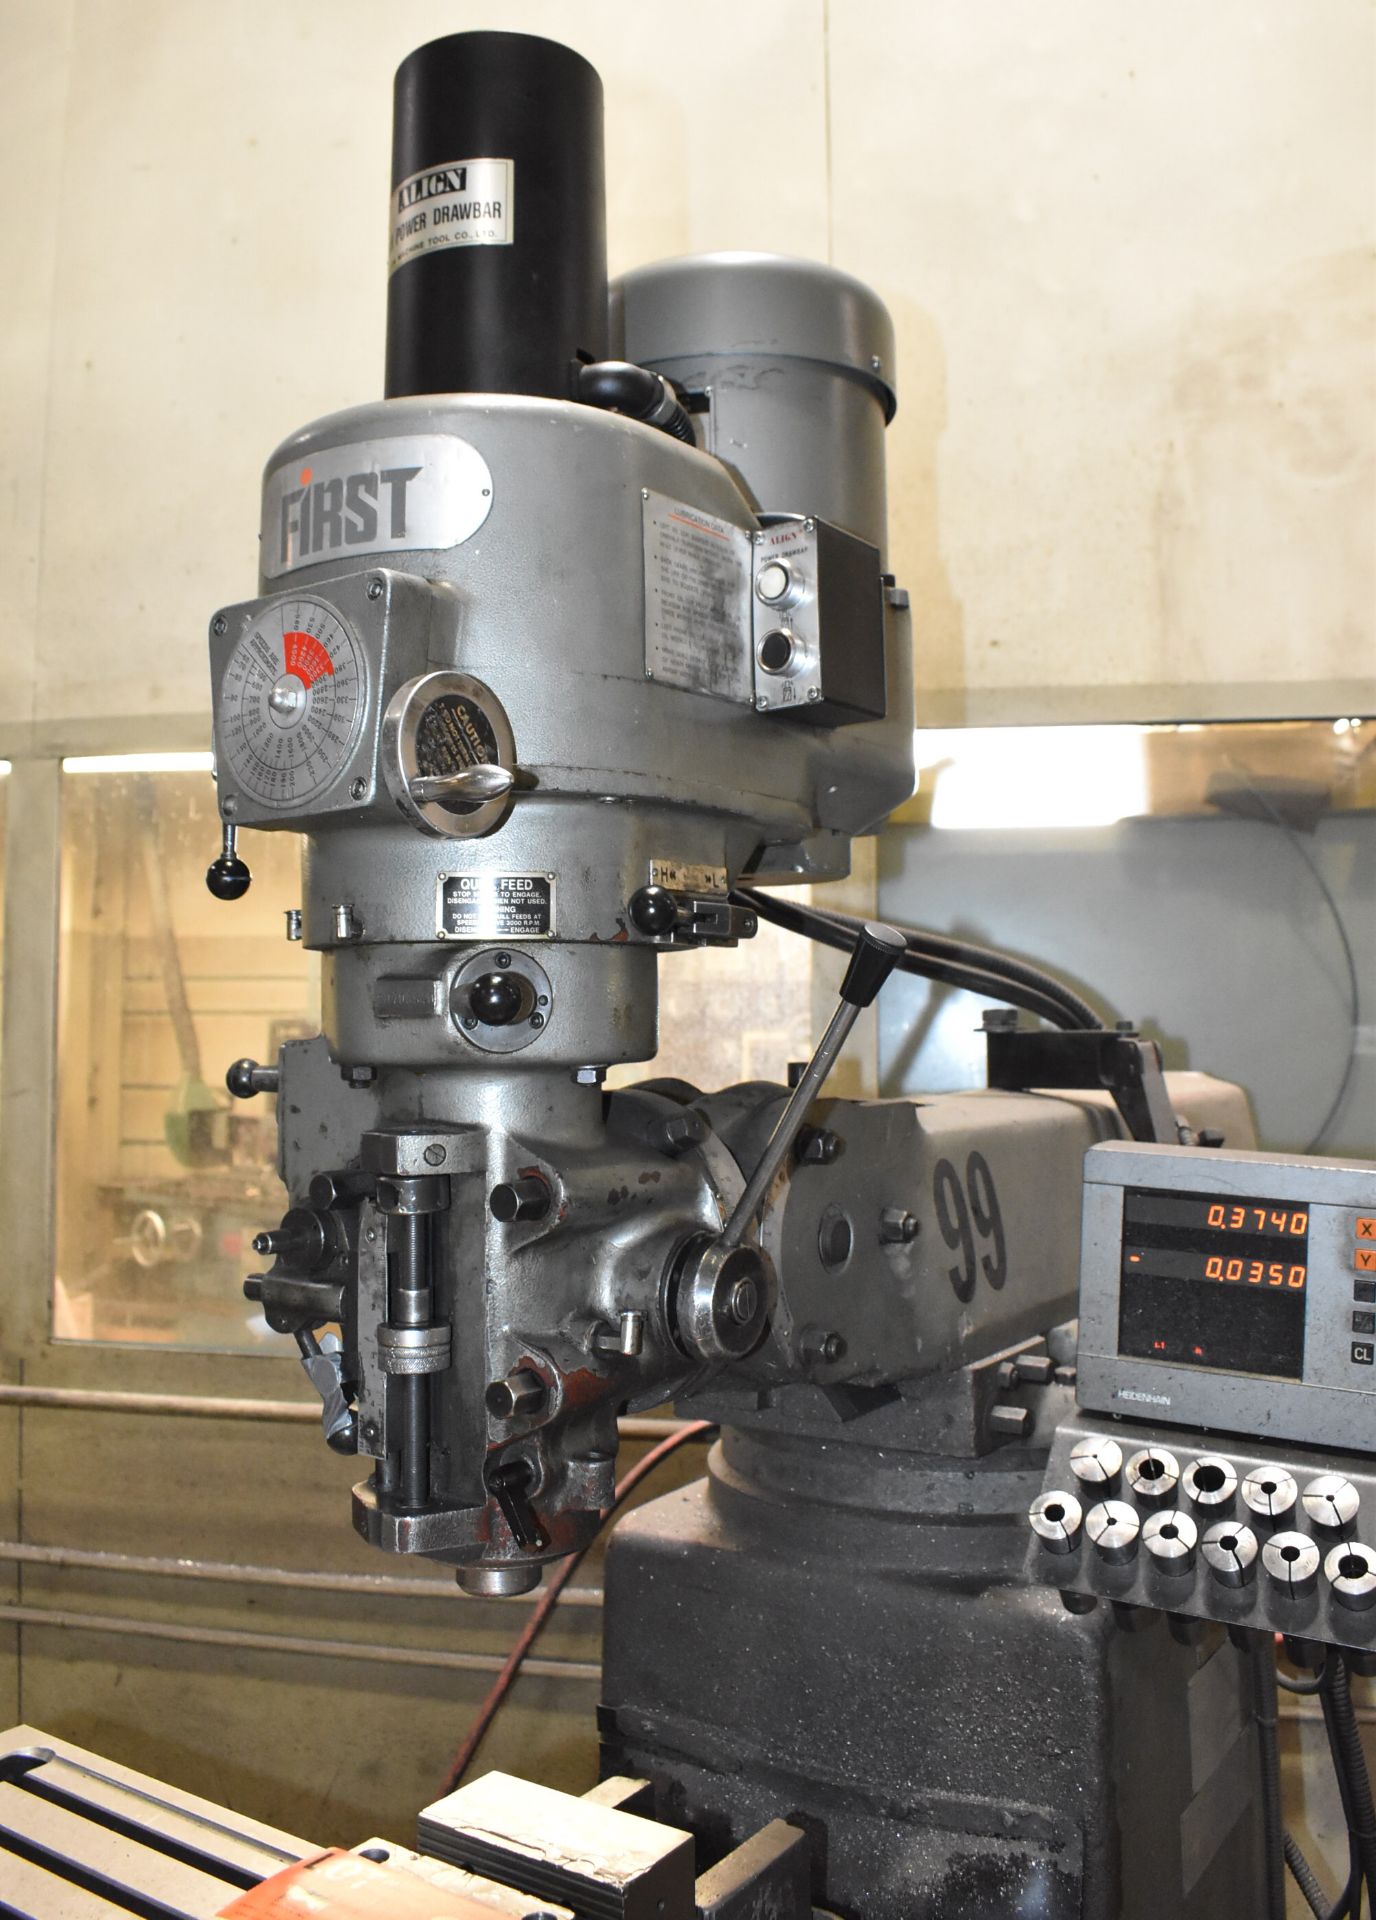 FIRST LC-185VS VERTICAL MILLING MACHINES WITH 50"X10" TABLE, SPEEDS TO 4500 RPM, ALIGN AIR POWER - Image 2 of 7